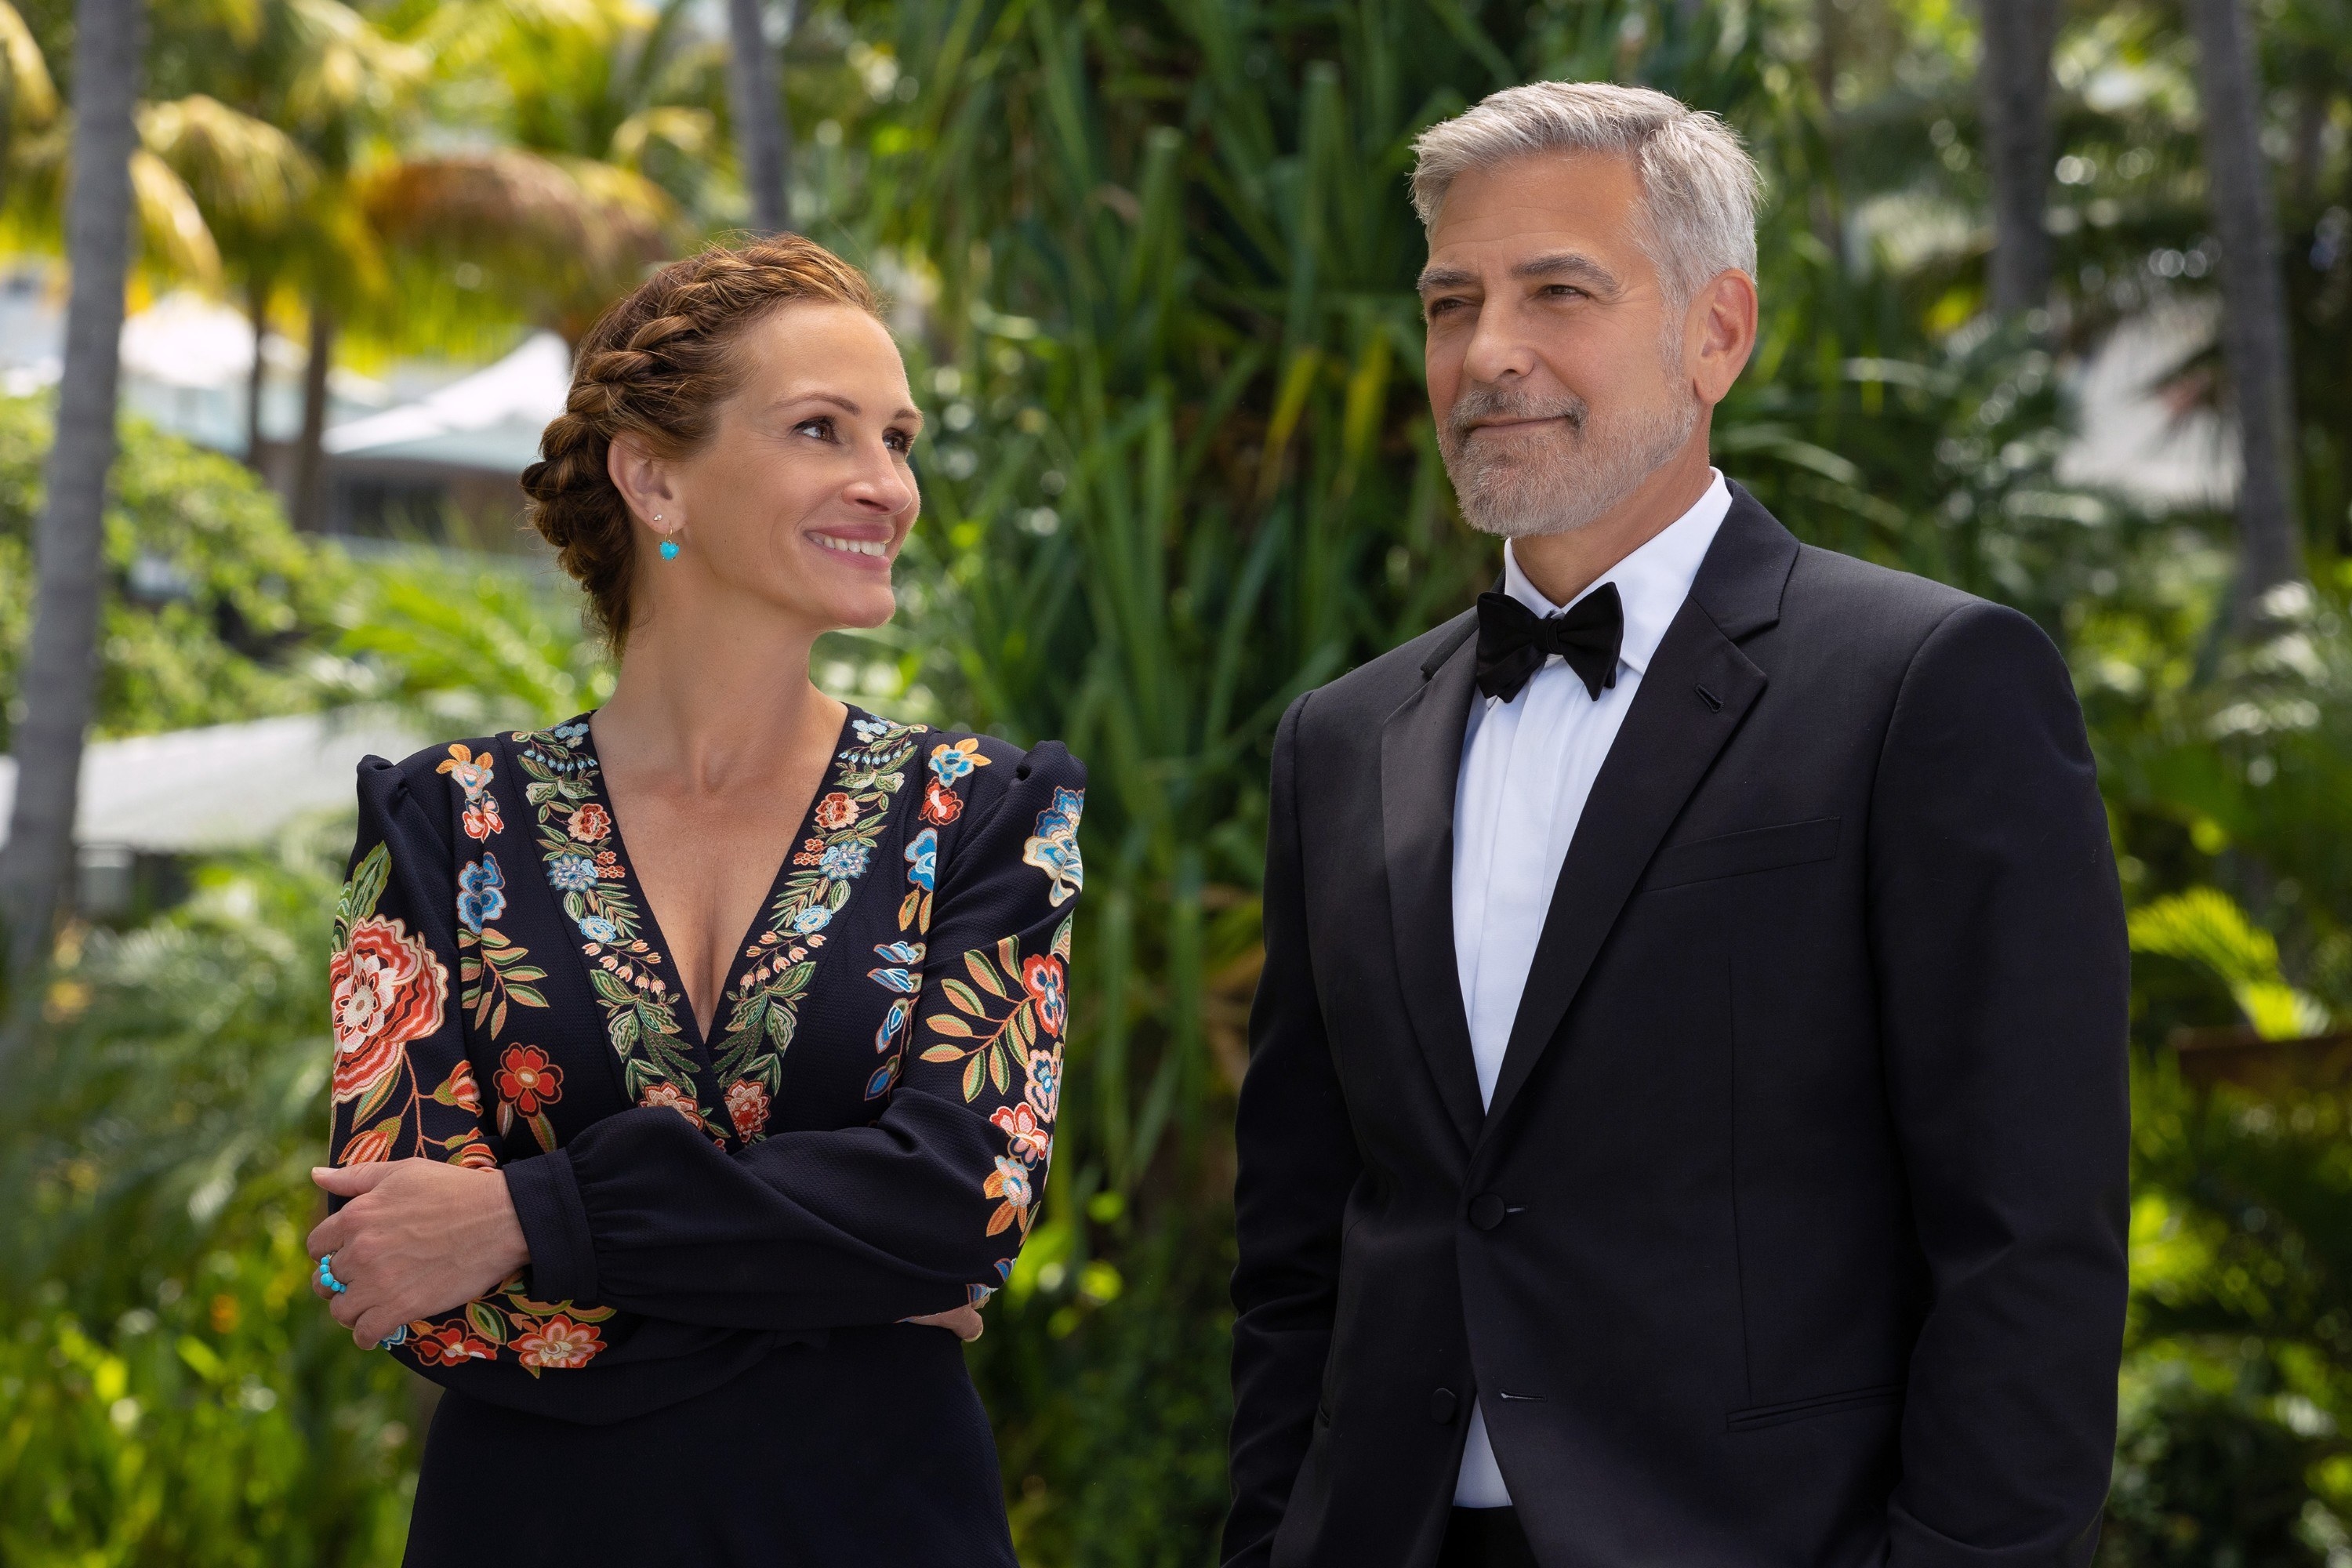 Julia Roberts and George Clooney dressed up